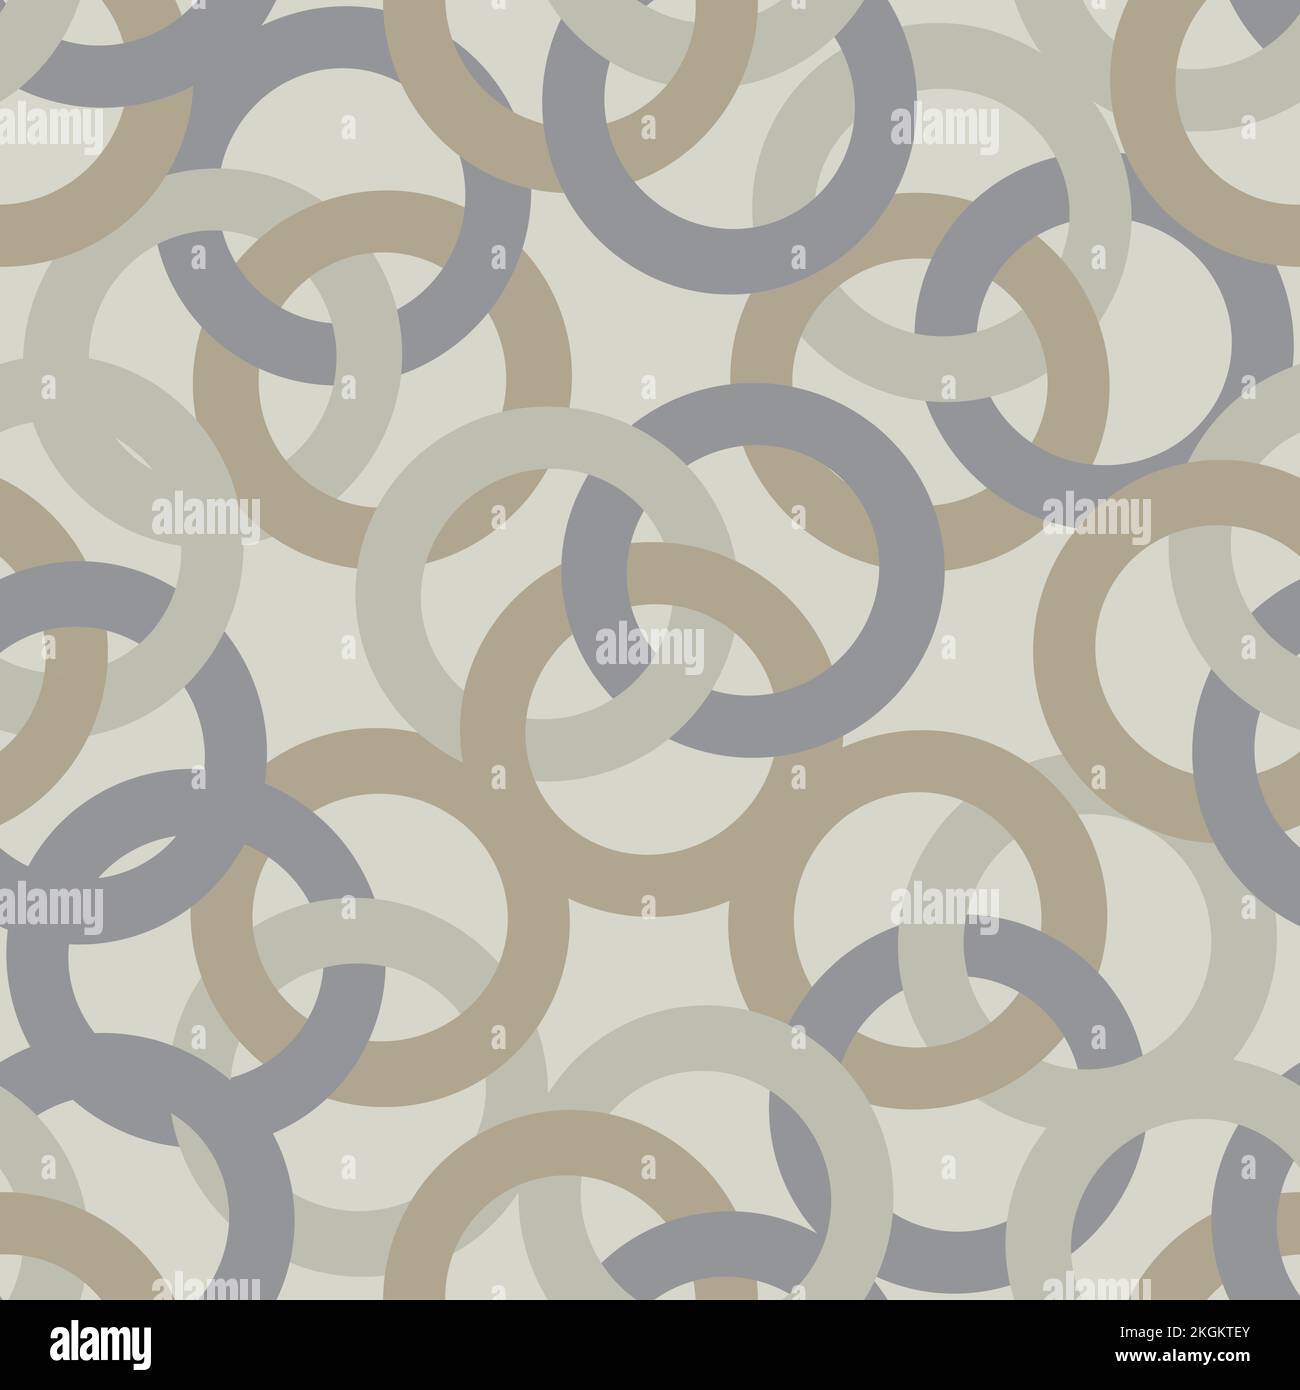 Tangled overlapping circles geometric seamless vector pattern background. Neutral color backdrop with interlocking loops. Dense weave repeat design Stock Vector